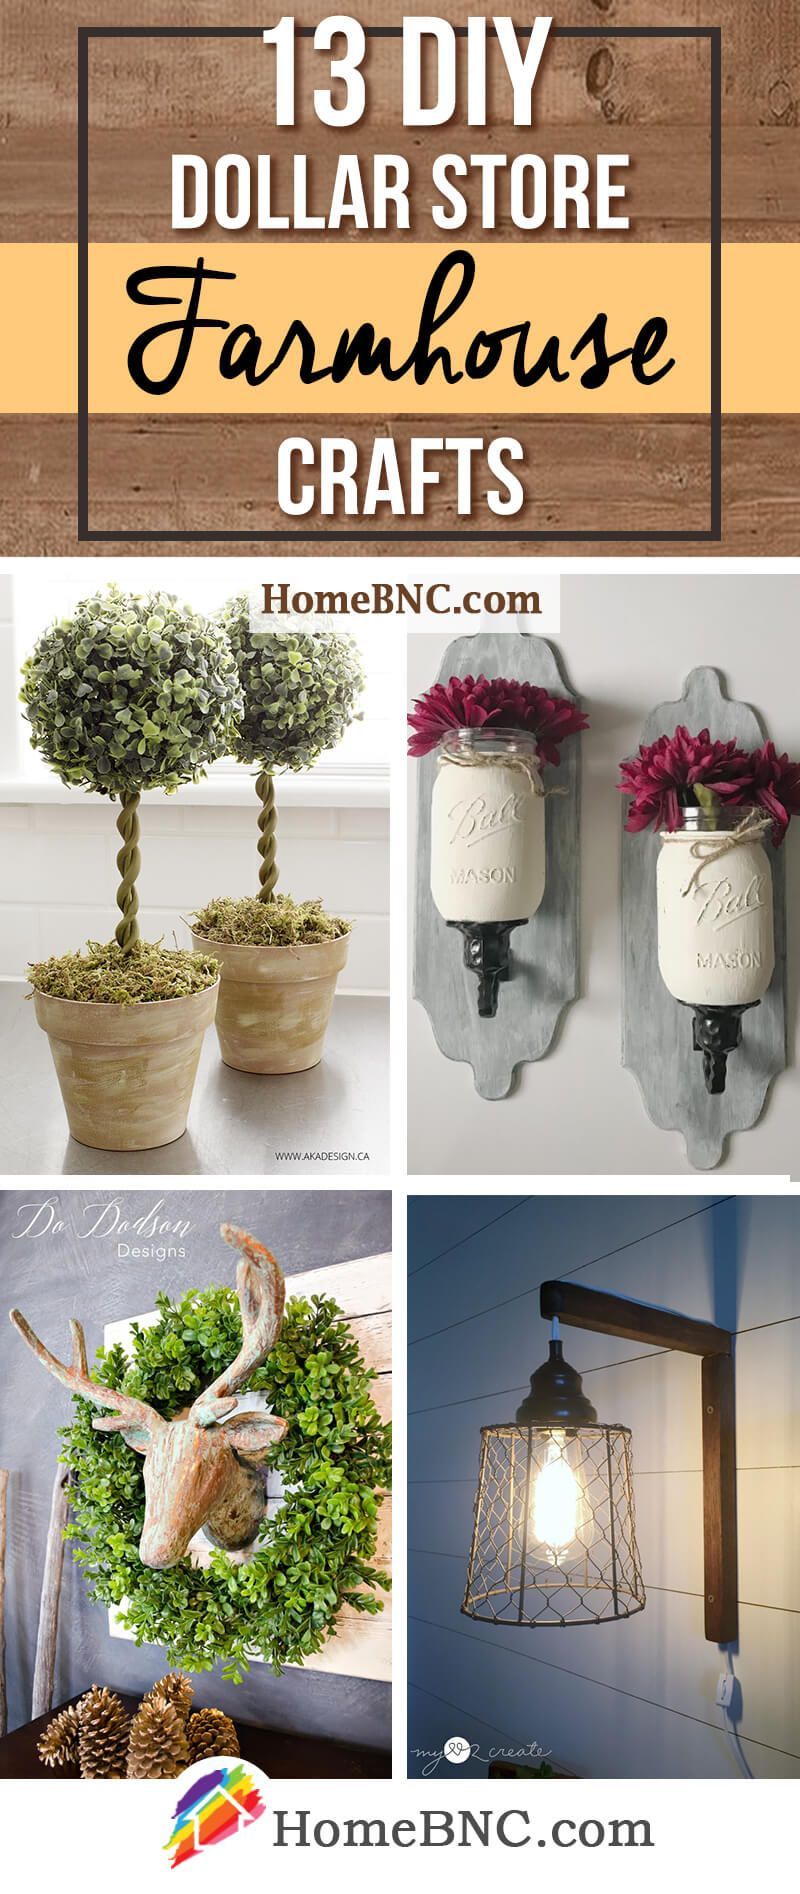 13 Creative DIY Dollar Store Farmhouse Decor Ideas to Give Your Home a Rustic Feel on a Budget -   24 diy home dollar store ideas